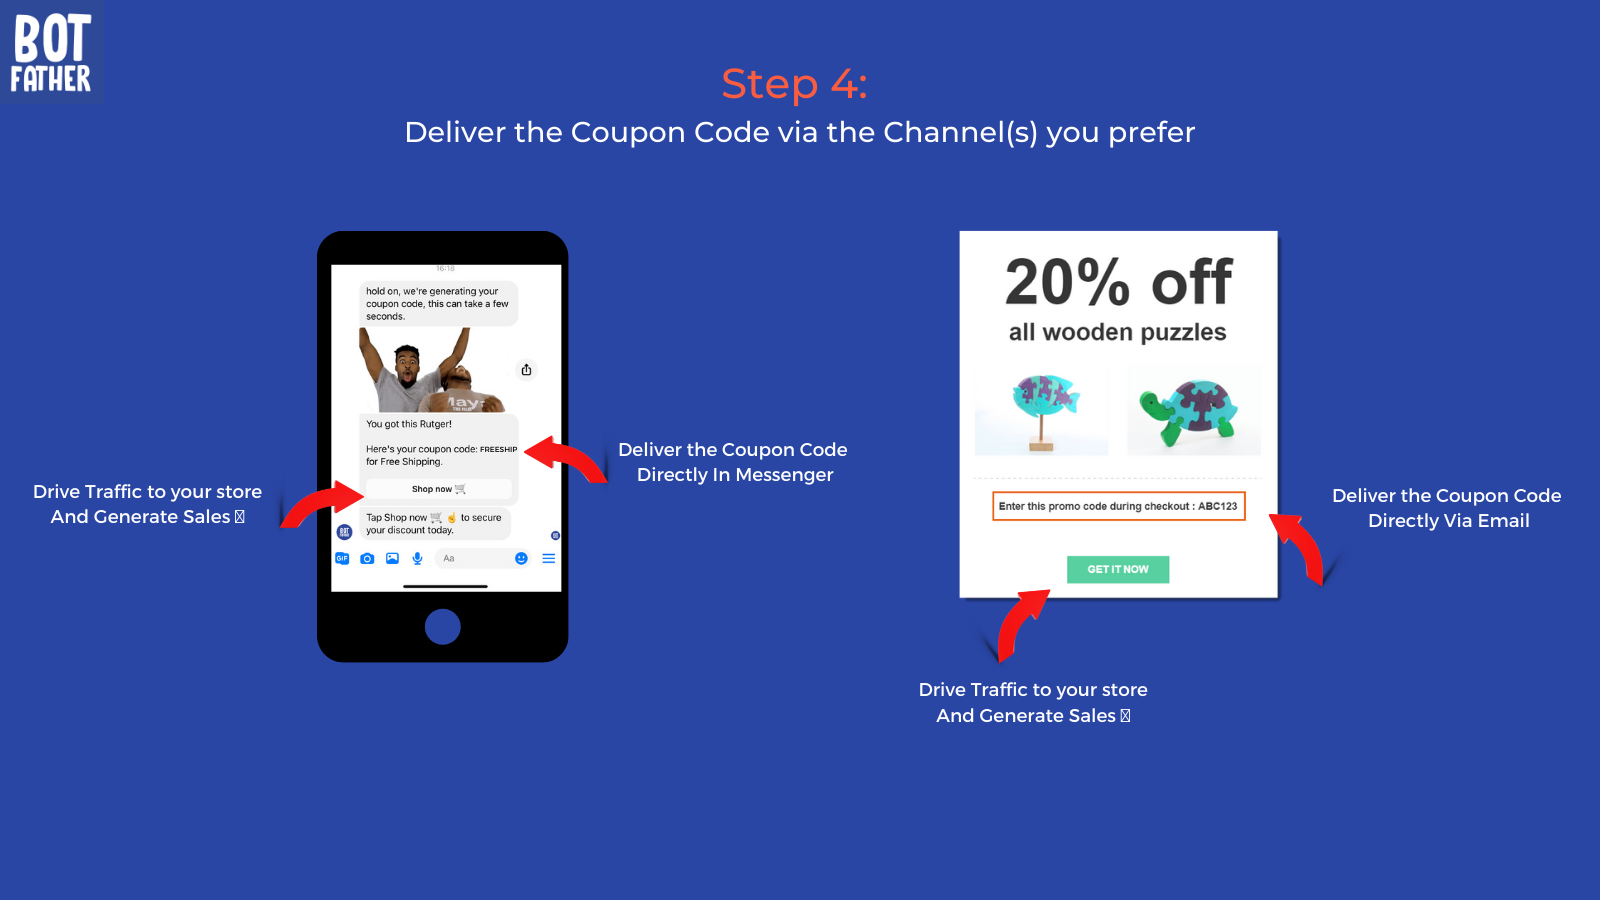 Deliver the Coupon Code via the Channel(s) you prefer